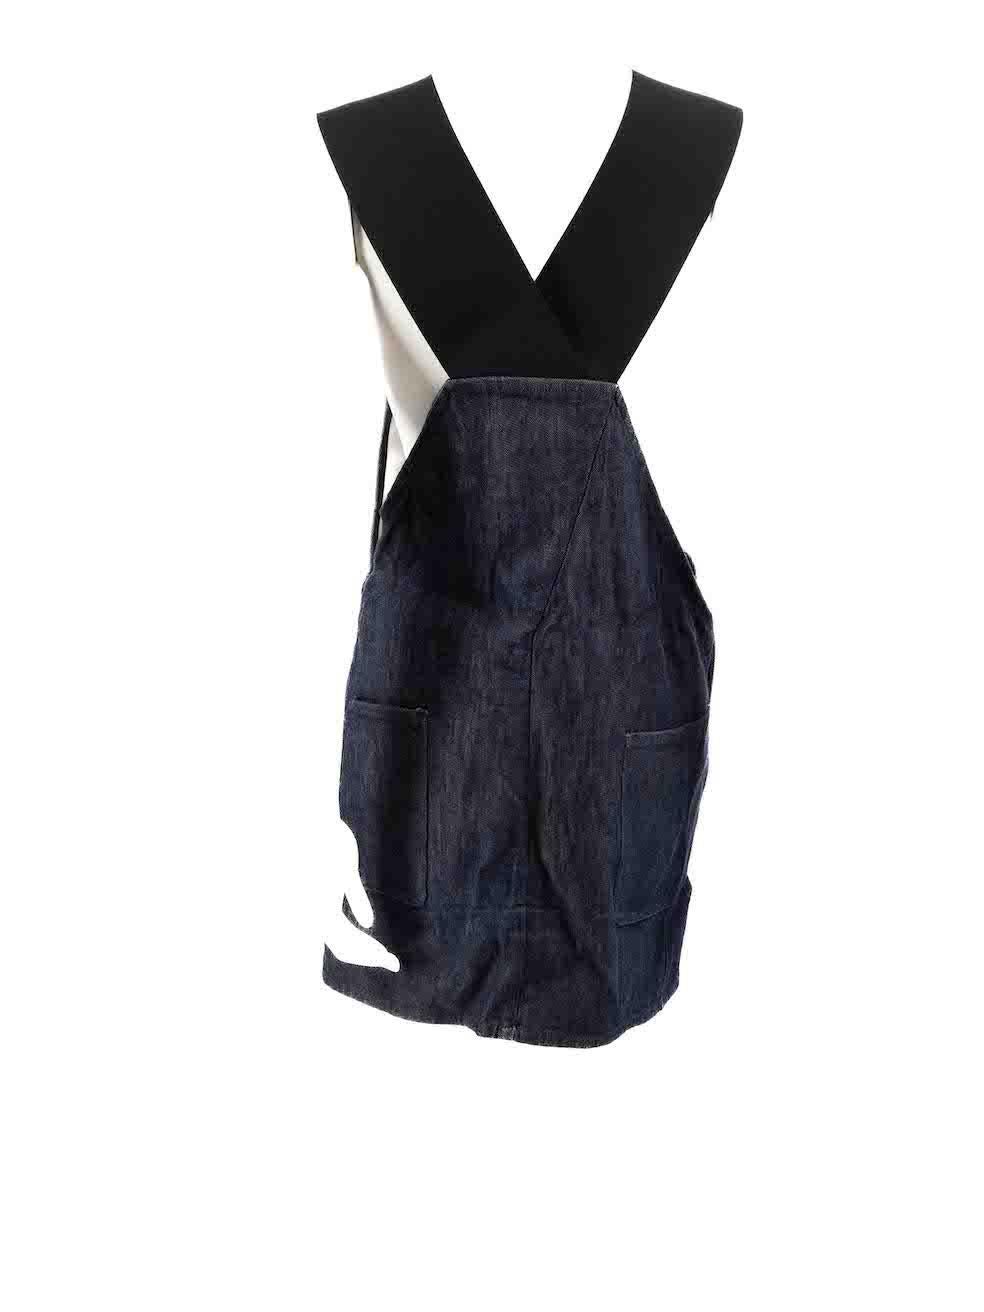 Acne Studios Blue Denim Pinafore Dress Size S In Good Condition For Sale In London, GB